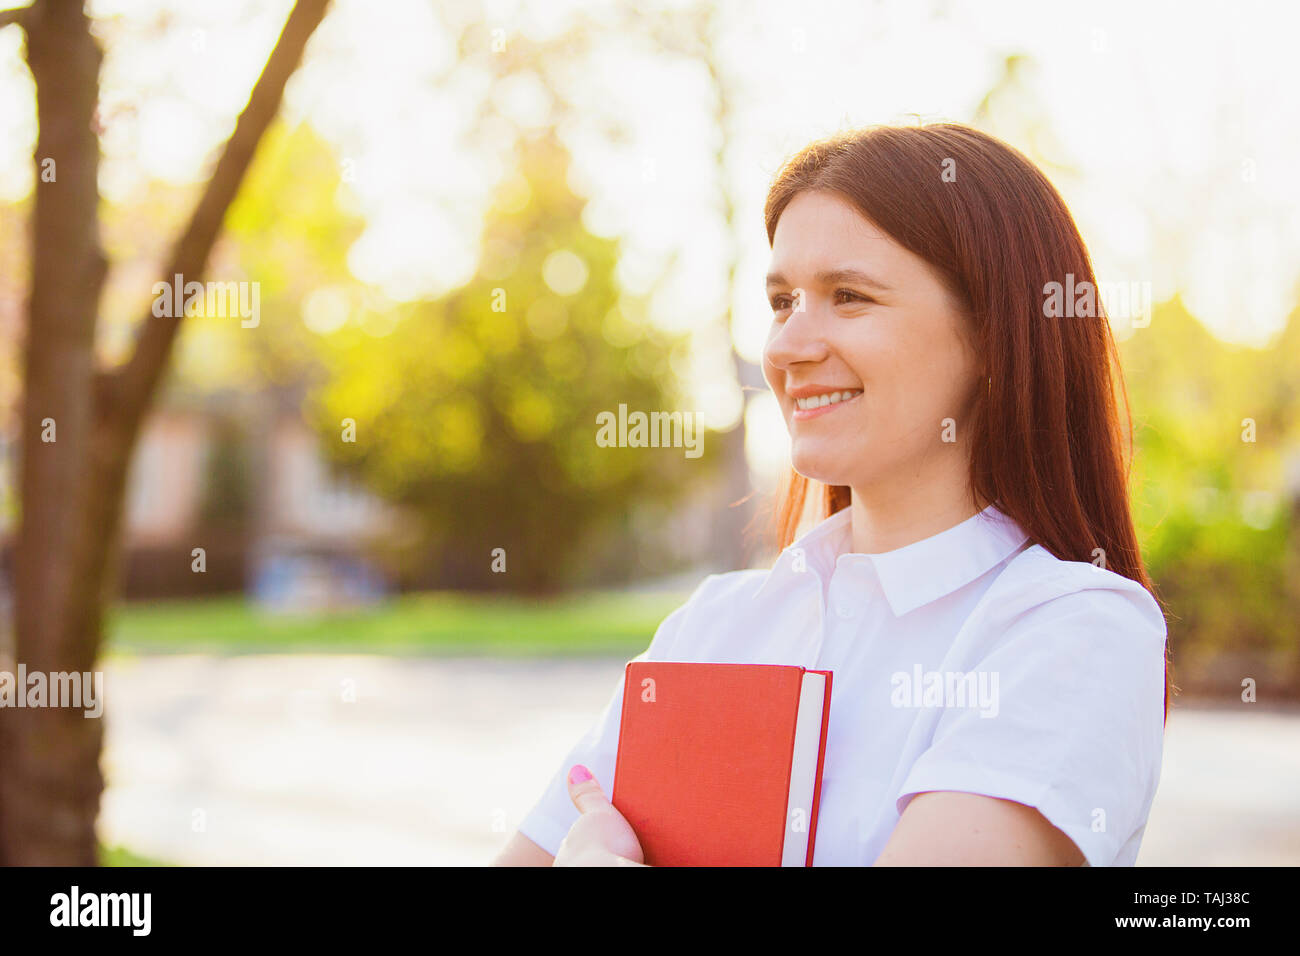 Excited smiling student girl outdoors holding a red book over sunny background . Smiling young student girl holding a book in campus. University conce Stock Photo